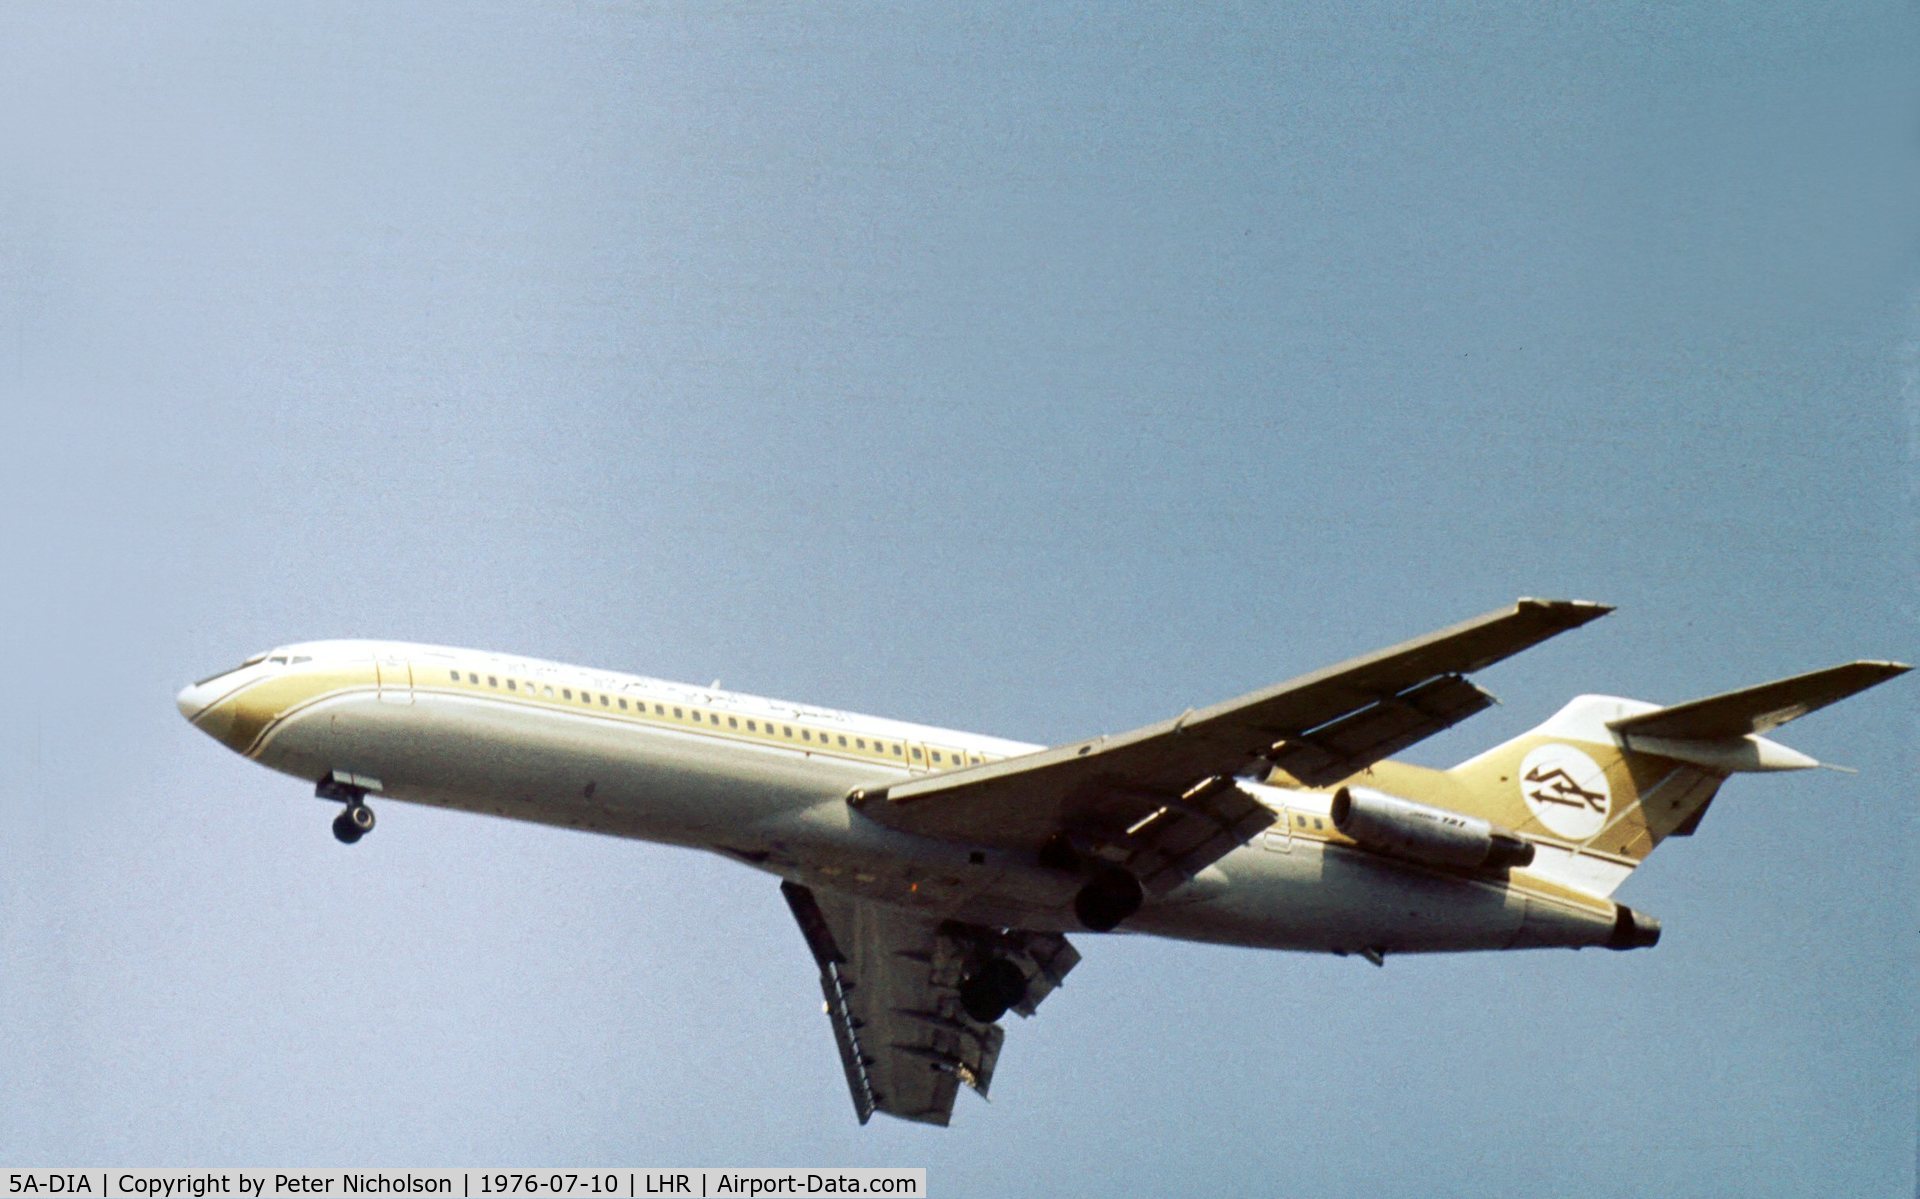 5A-DIA, 1975 Boeing 727-2L5 C/N 21050, Boeing 727-2L5 of Libyan Arab Airlines on final approach to London Heathrow in the Summer of 1976.